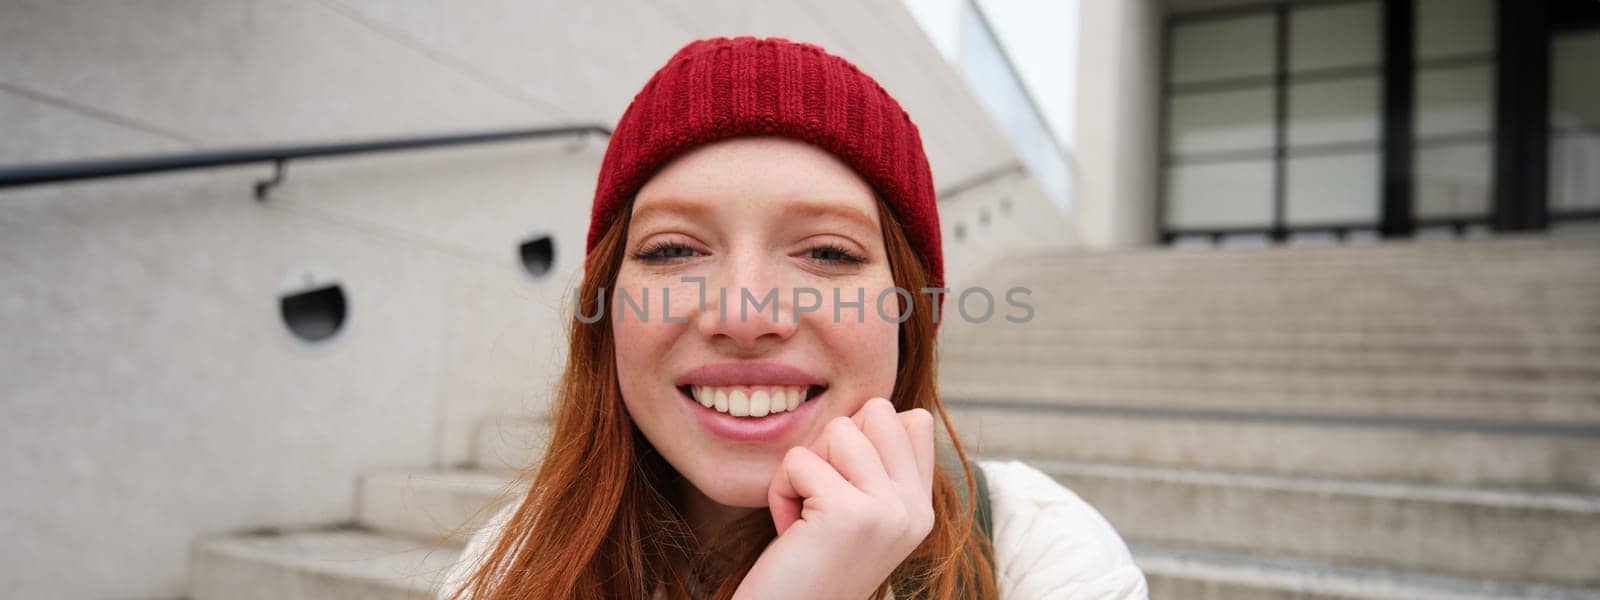 Beautiful redhead student, girl in red hat, smiles sincere, looks happy and relaxed, sits on stairs outdoors. Copy space